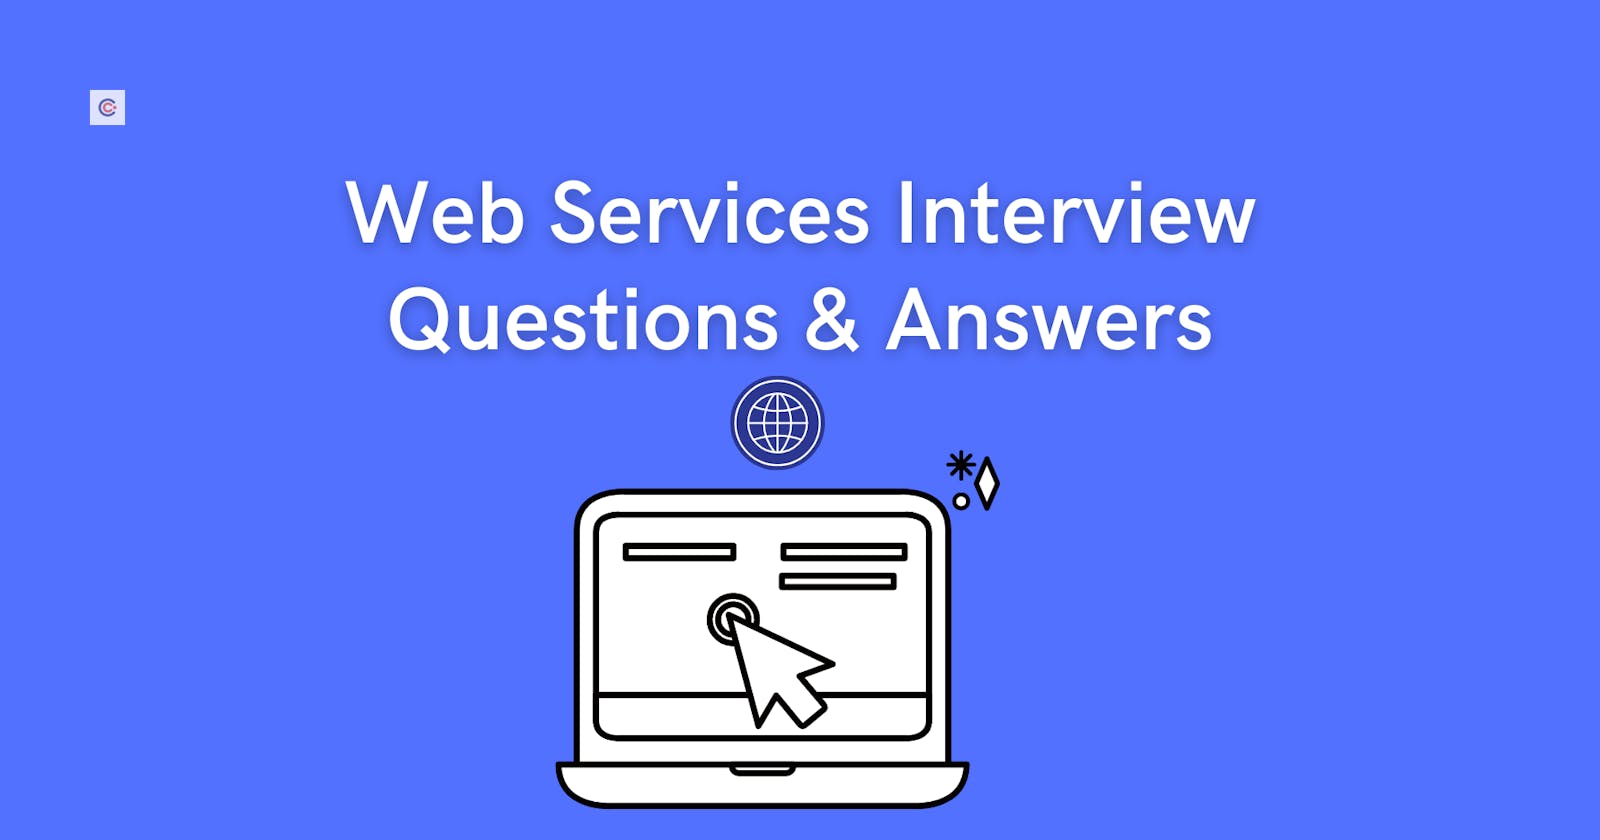 45+ Best Web Services Interview Questions & Answers in 2021